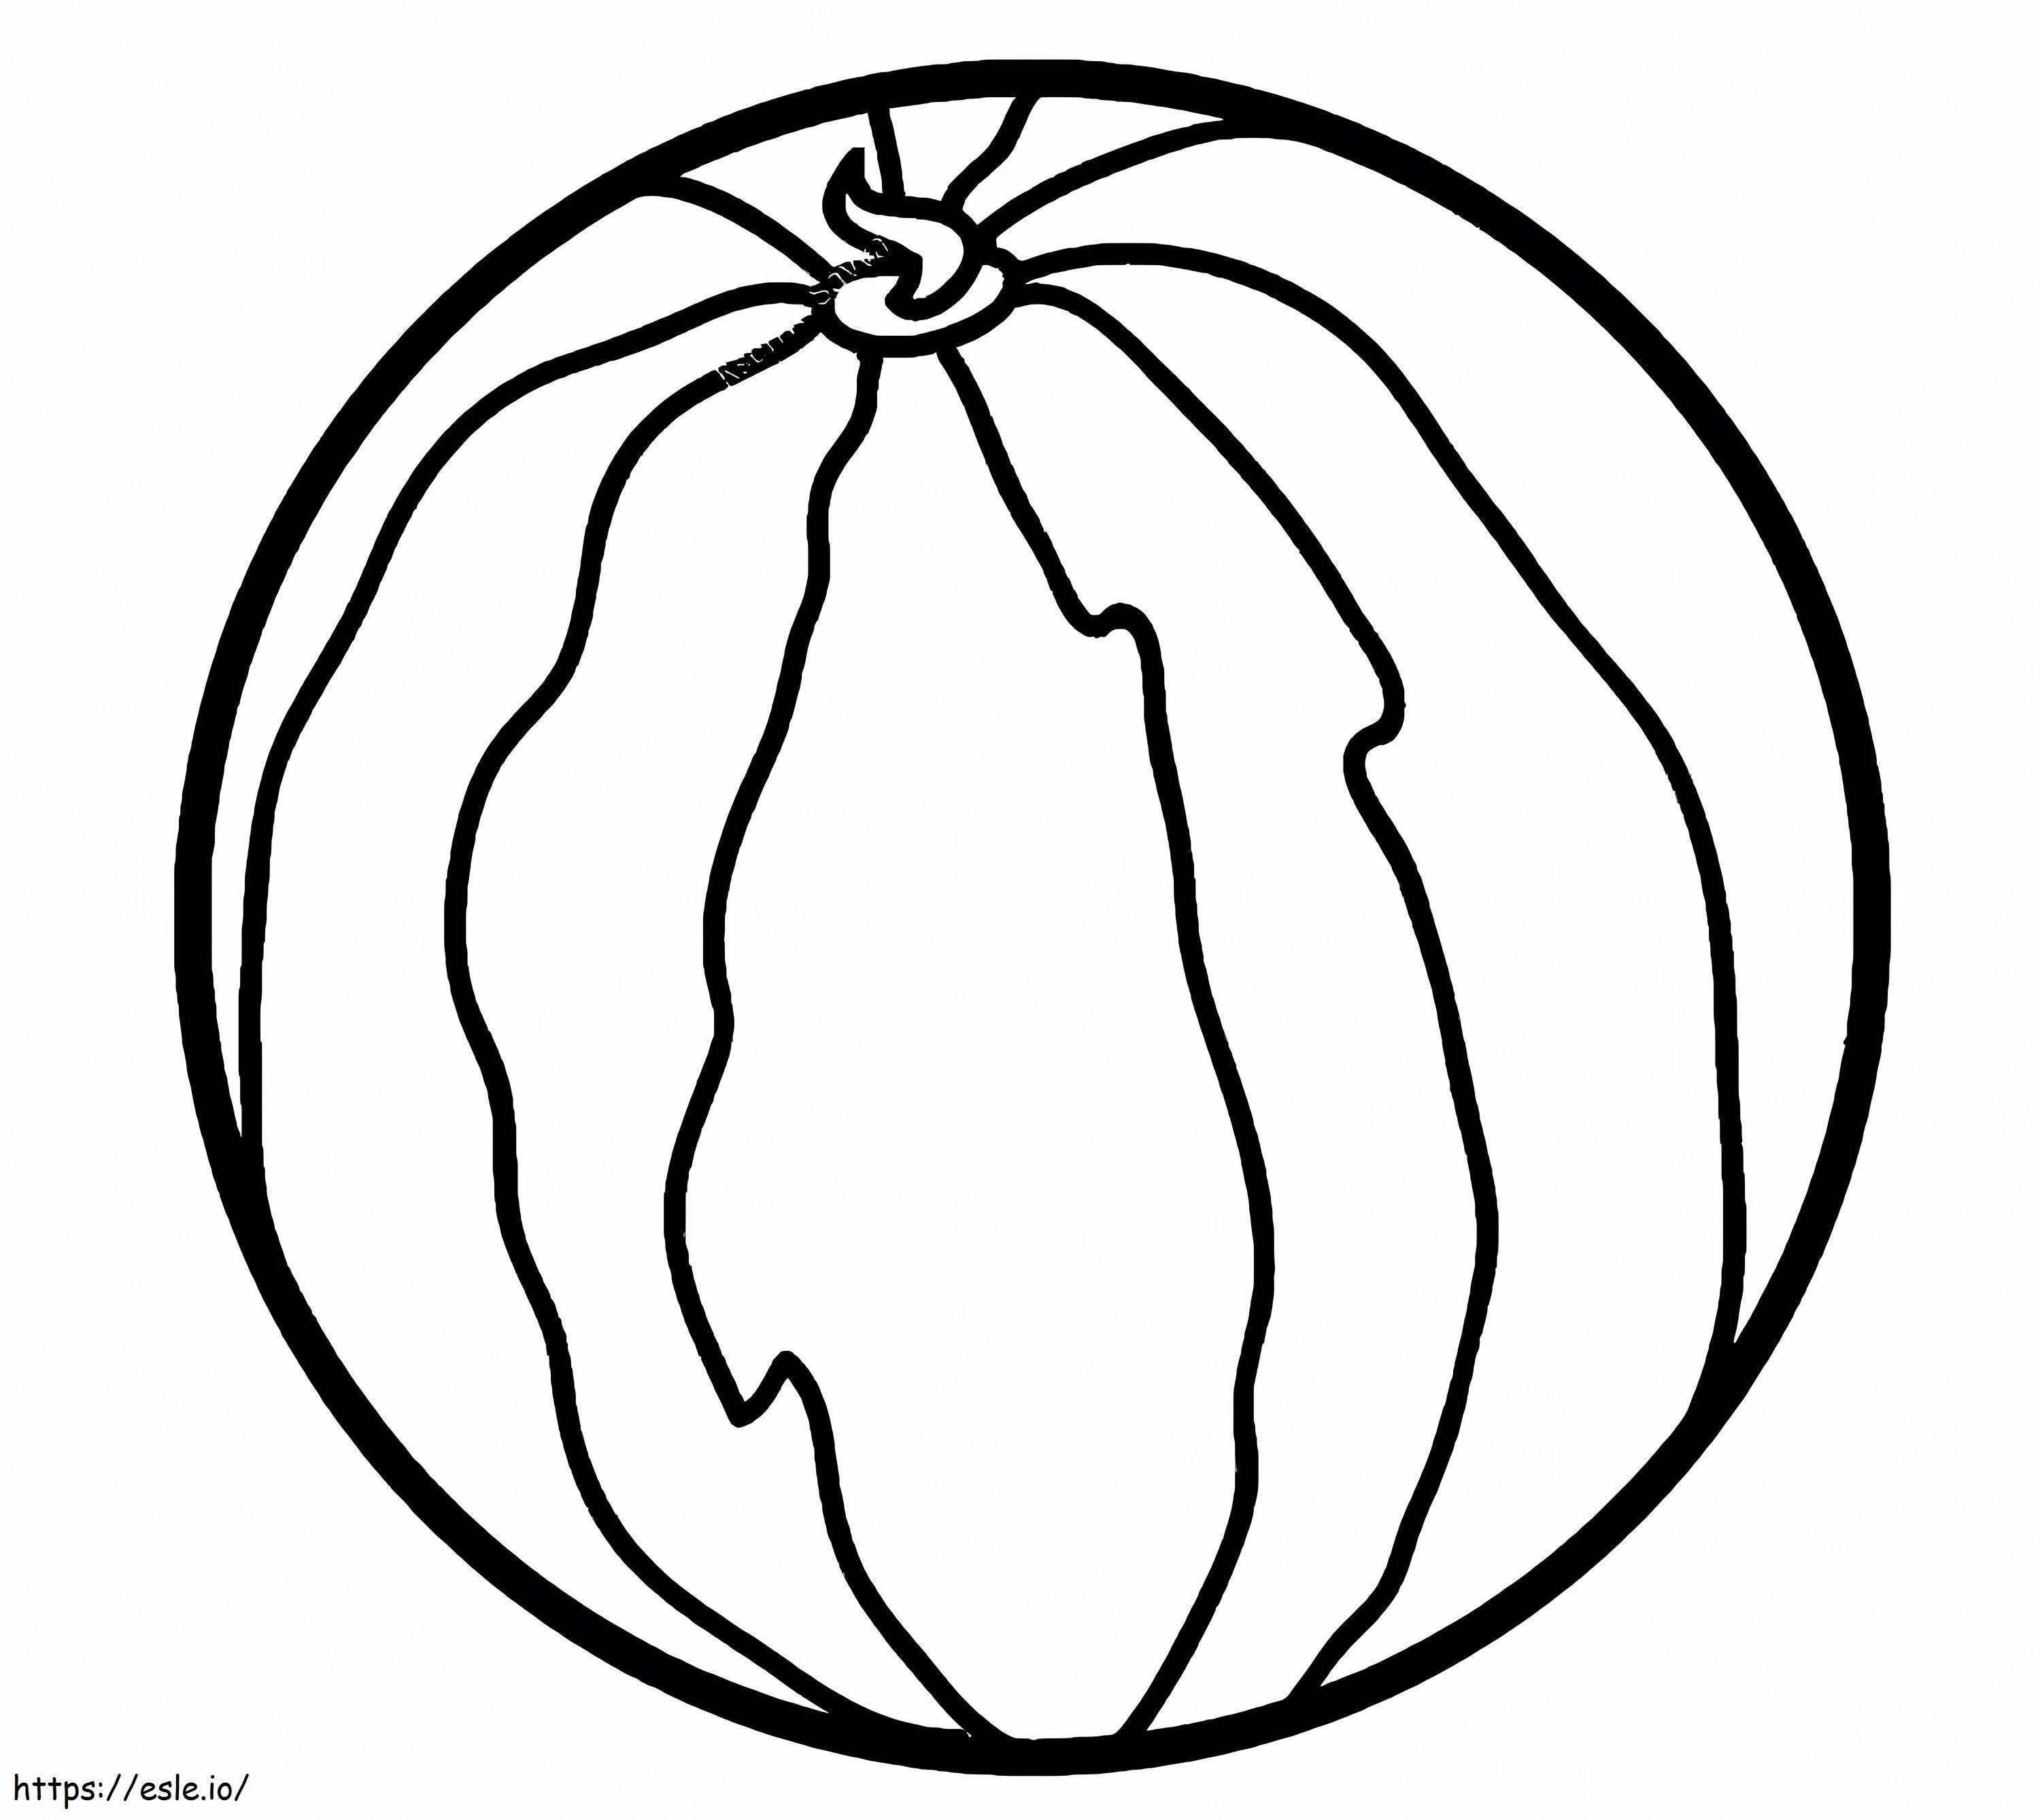 Regular Watermelon coloring page